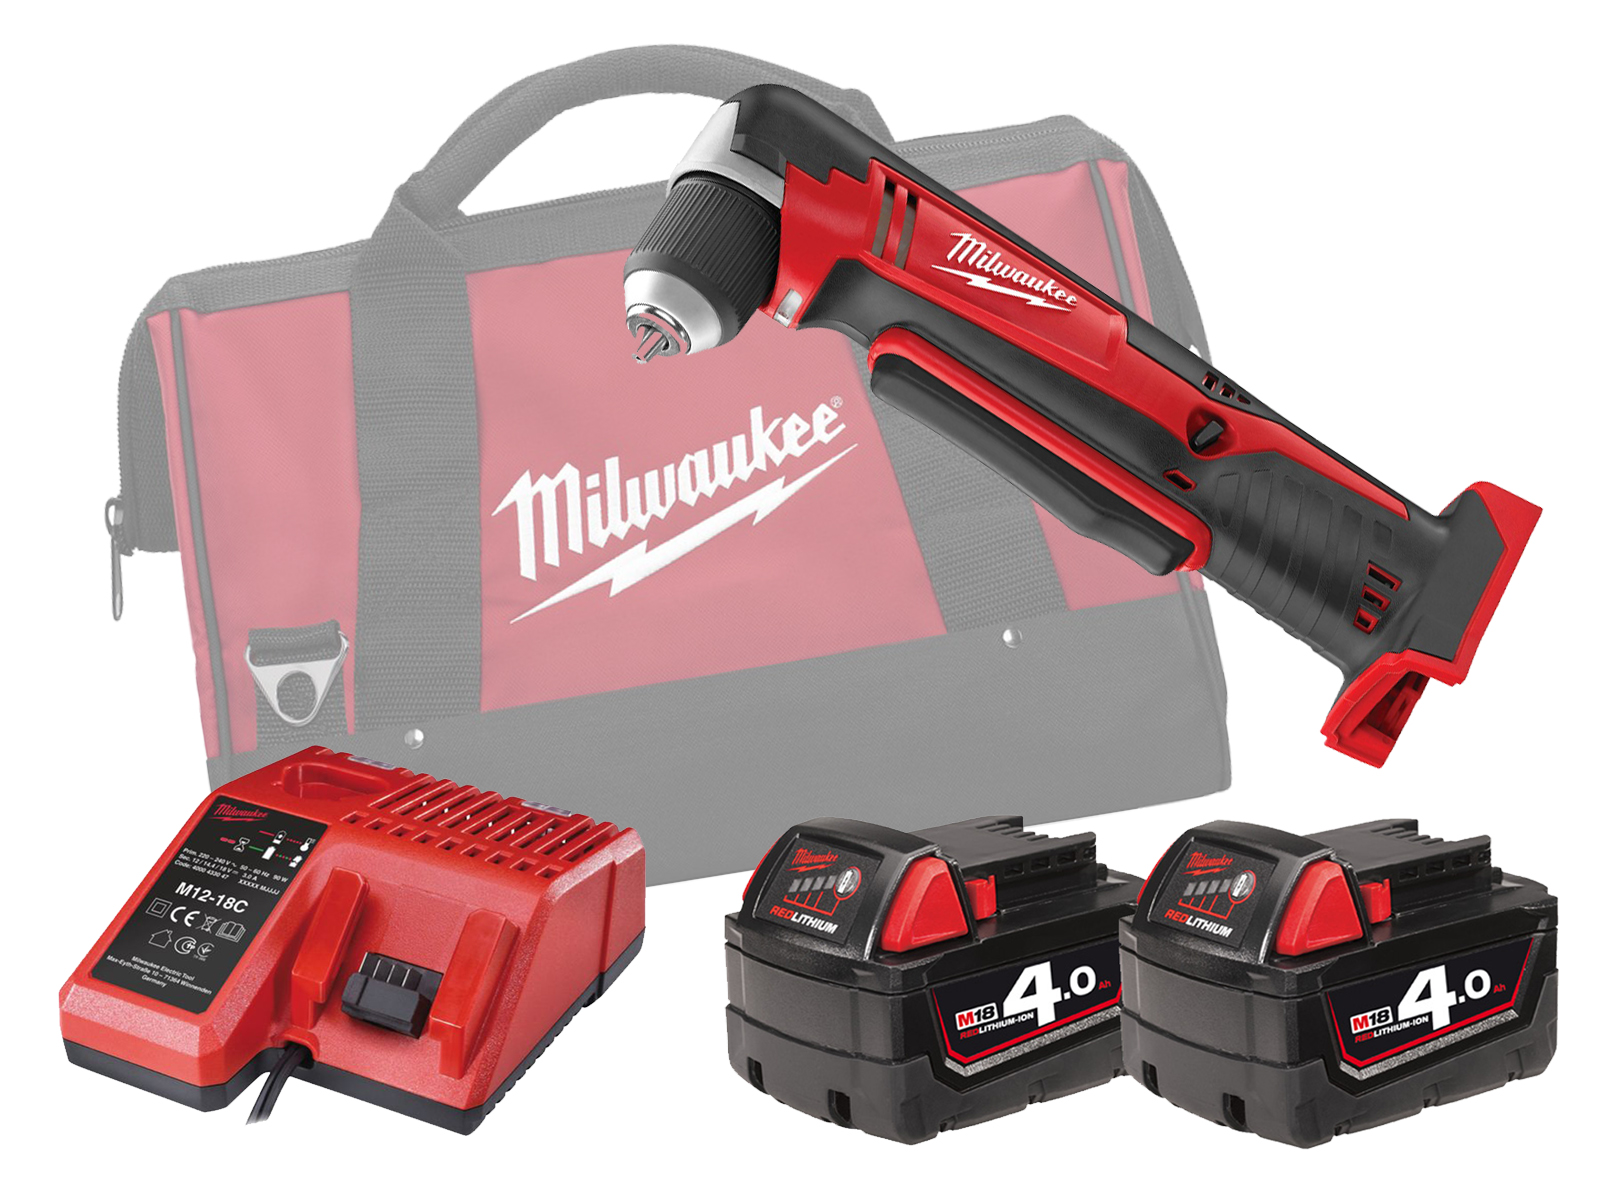 Milwaukee 18V Compact Right Angle Drill - C18RAD - 4.0Ah Pack